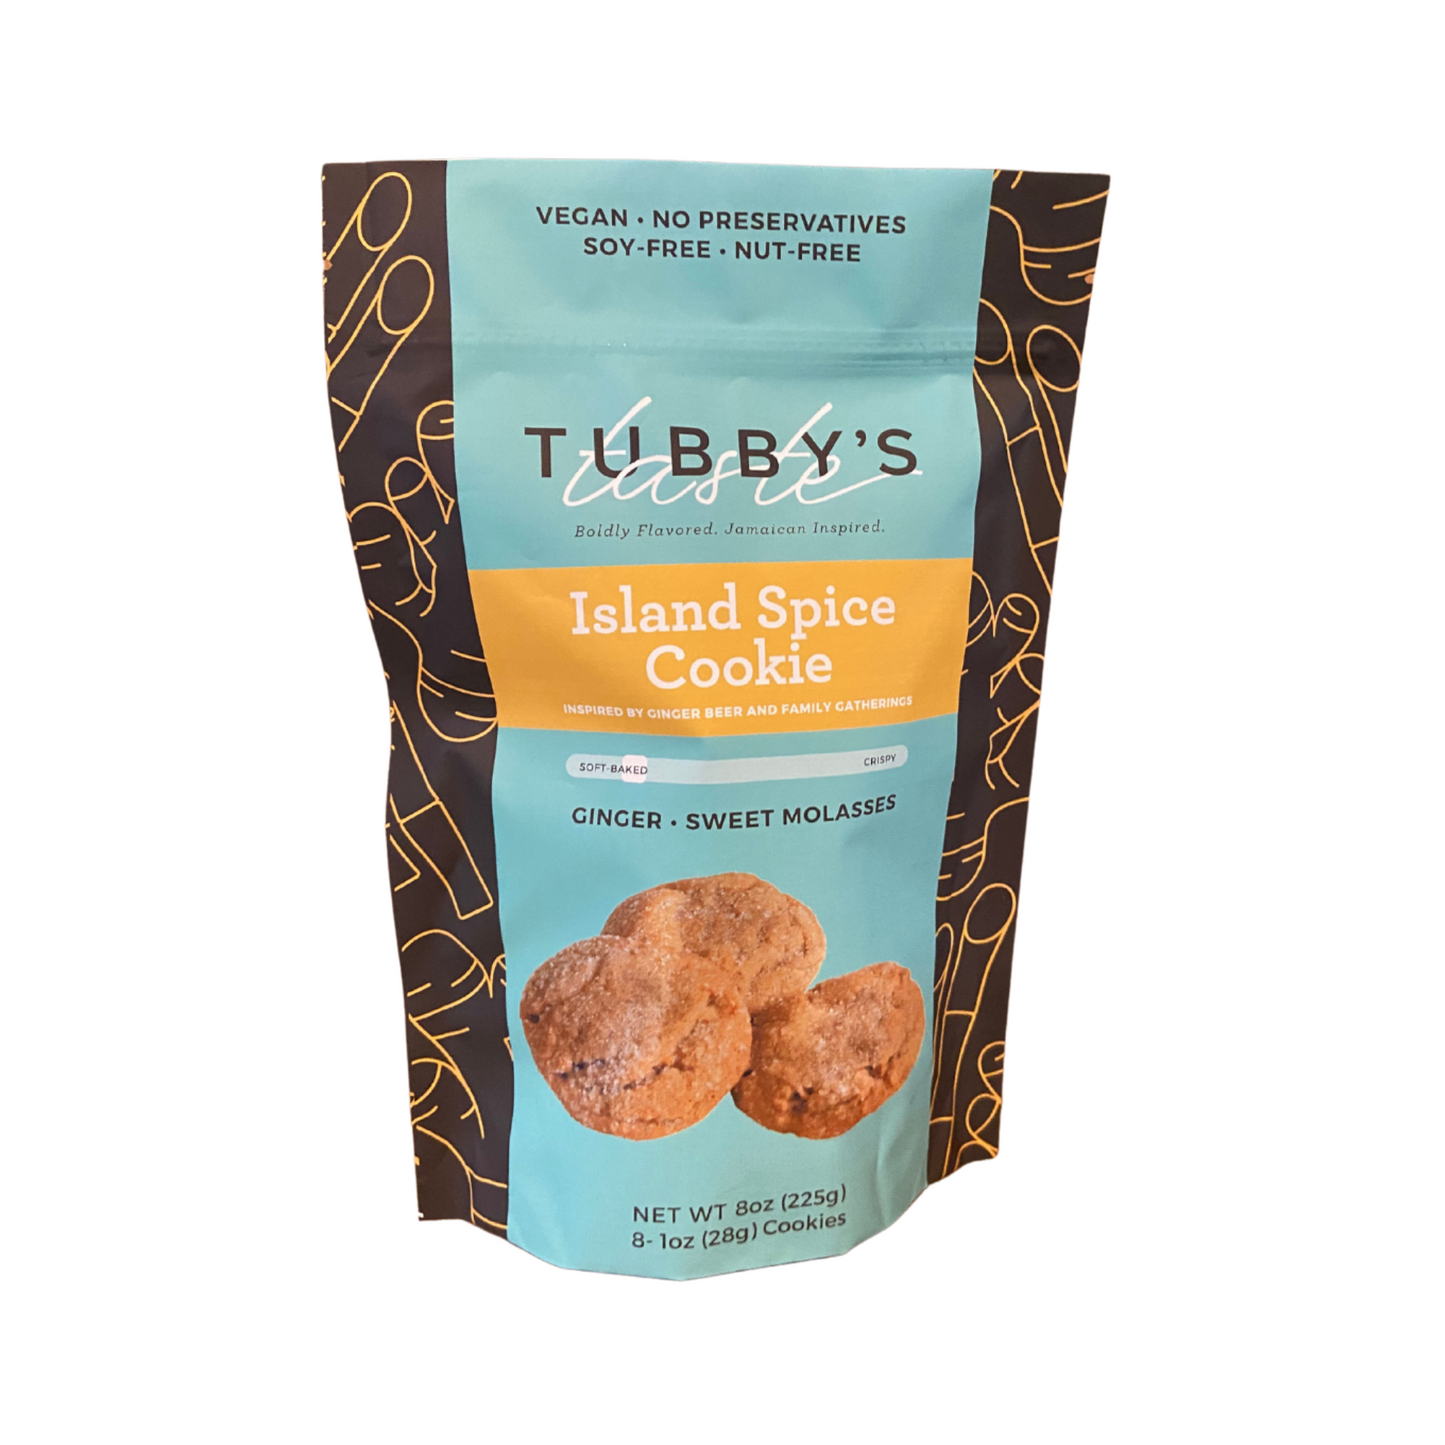 Tubby's Taste cookie bag labeled island spice on a white background.